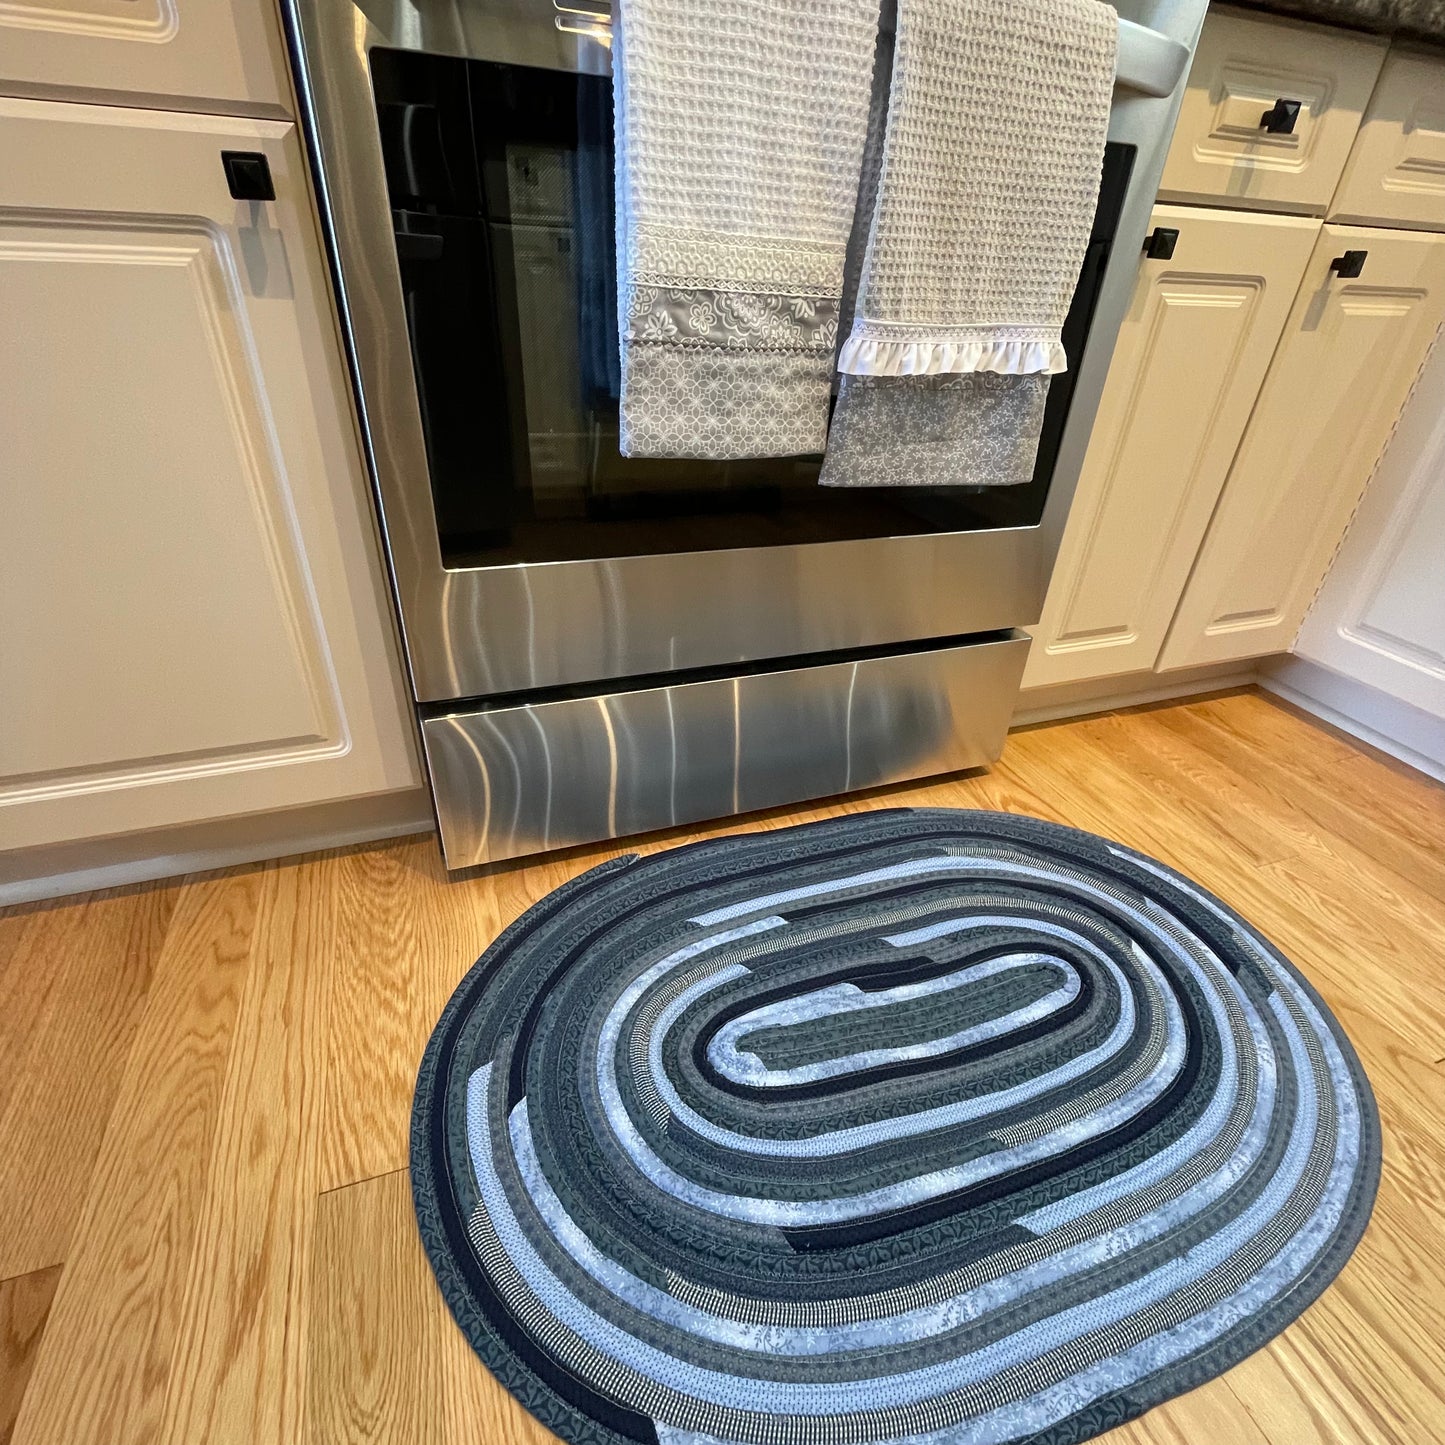 Vintage-Style Blue Cotton Kitchen Sink Rug - One of a Kind, Multipurpose, Made in Canada